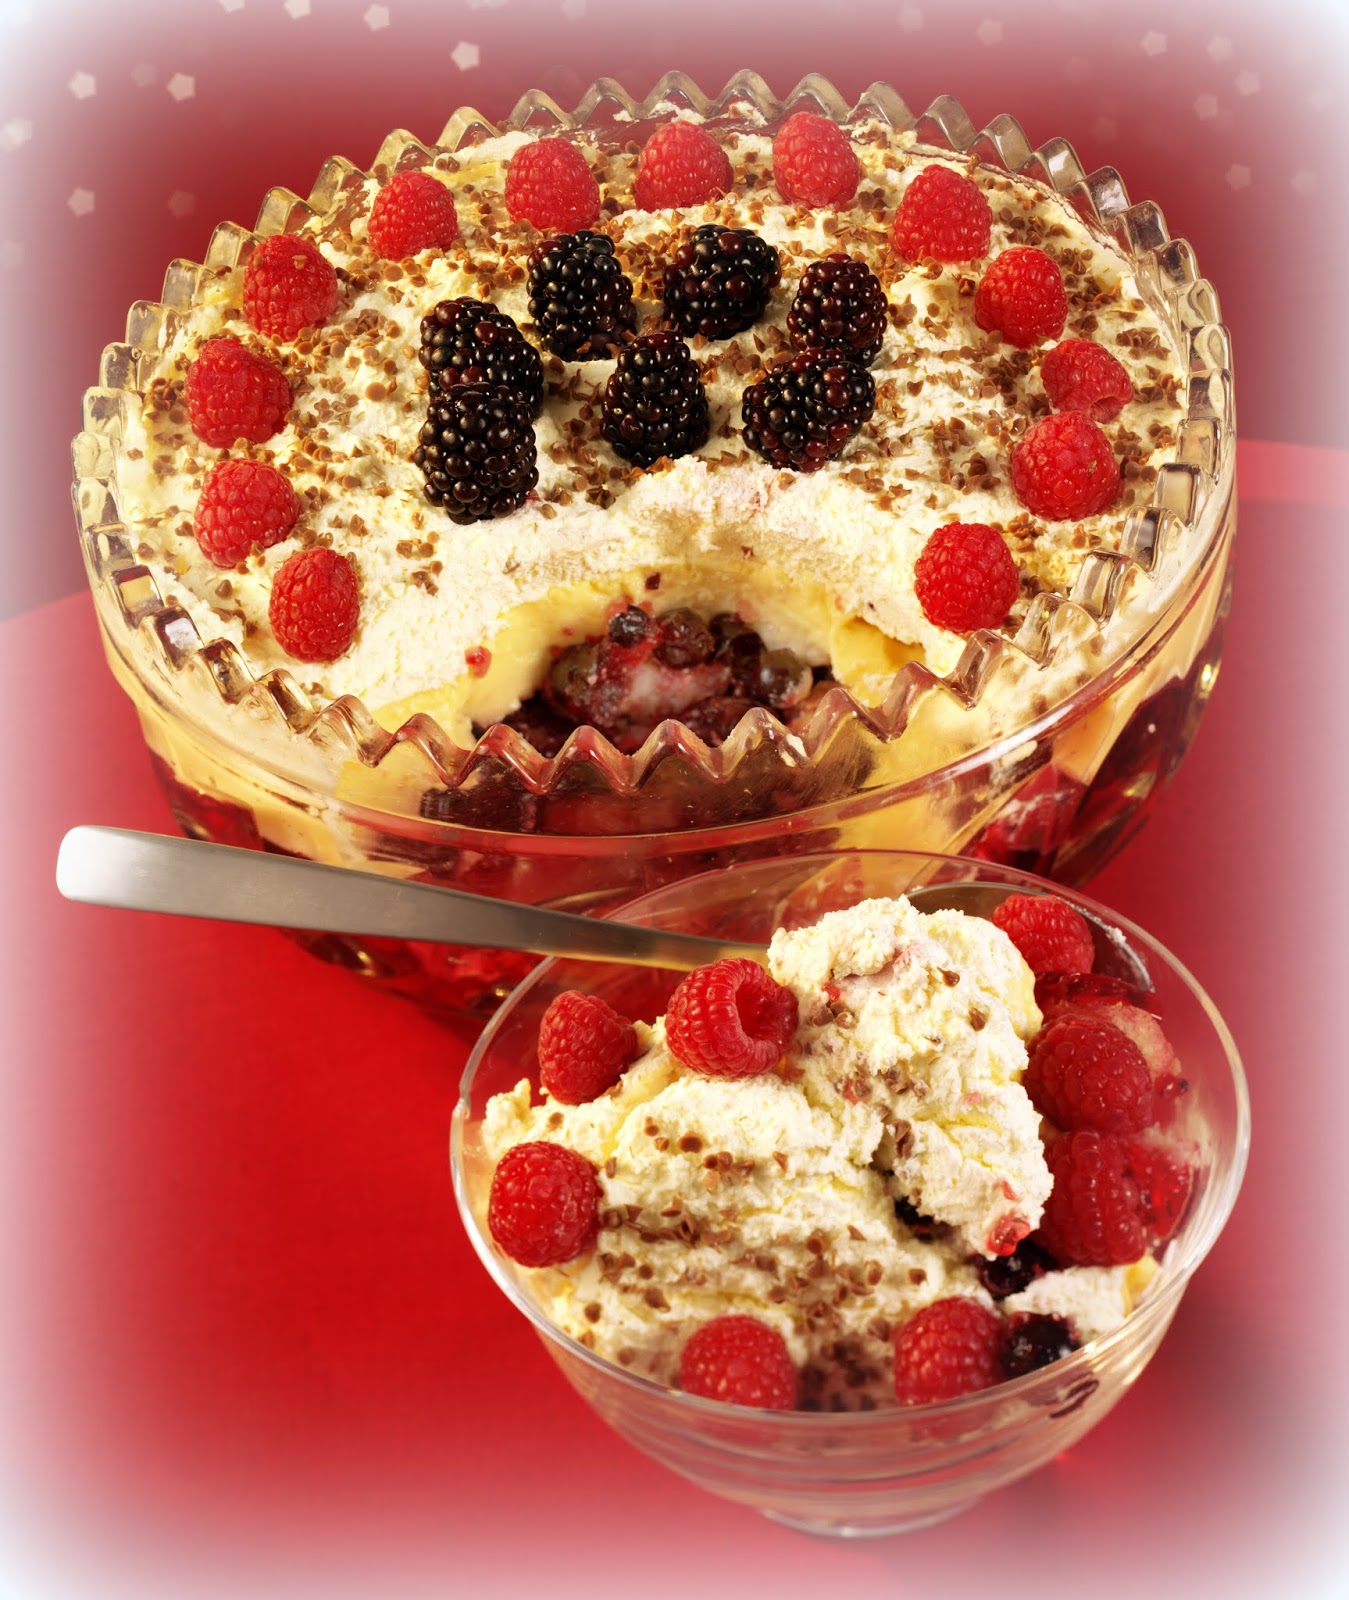 A Traditional English Trifle | The English Kitchen